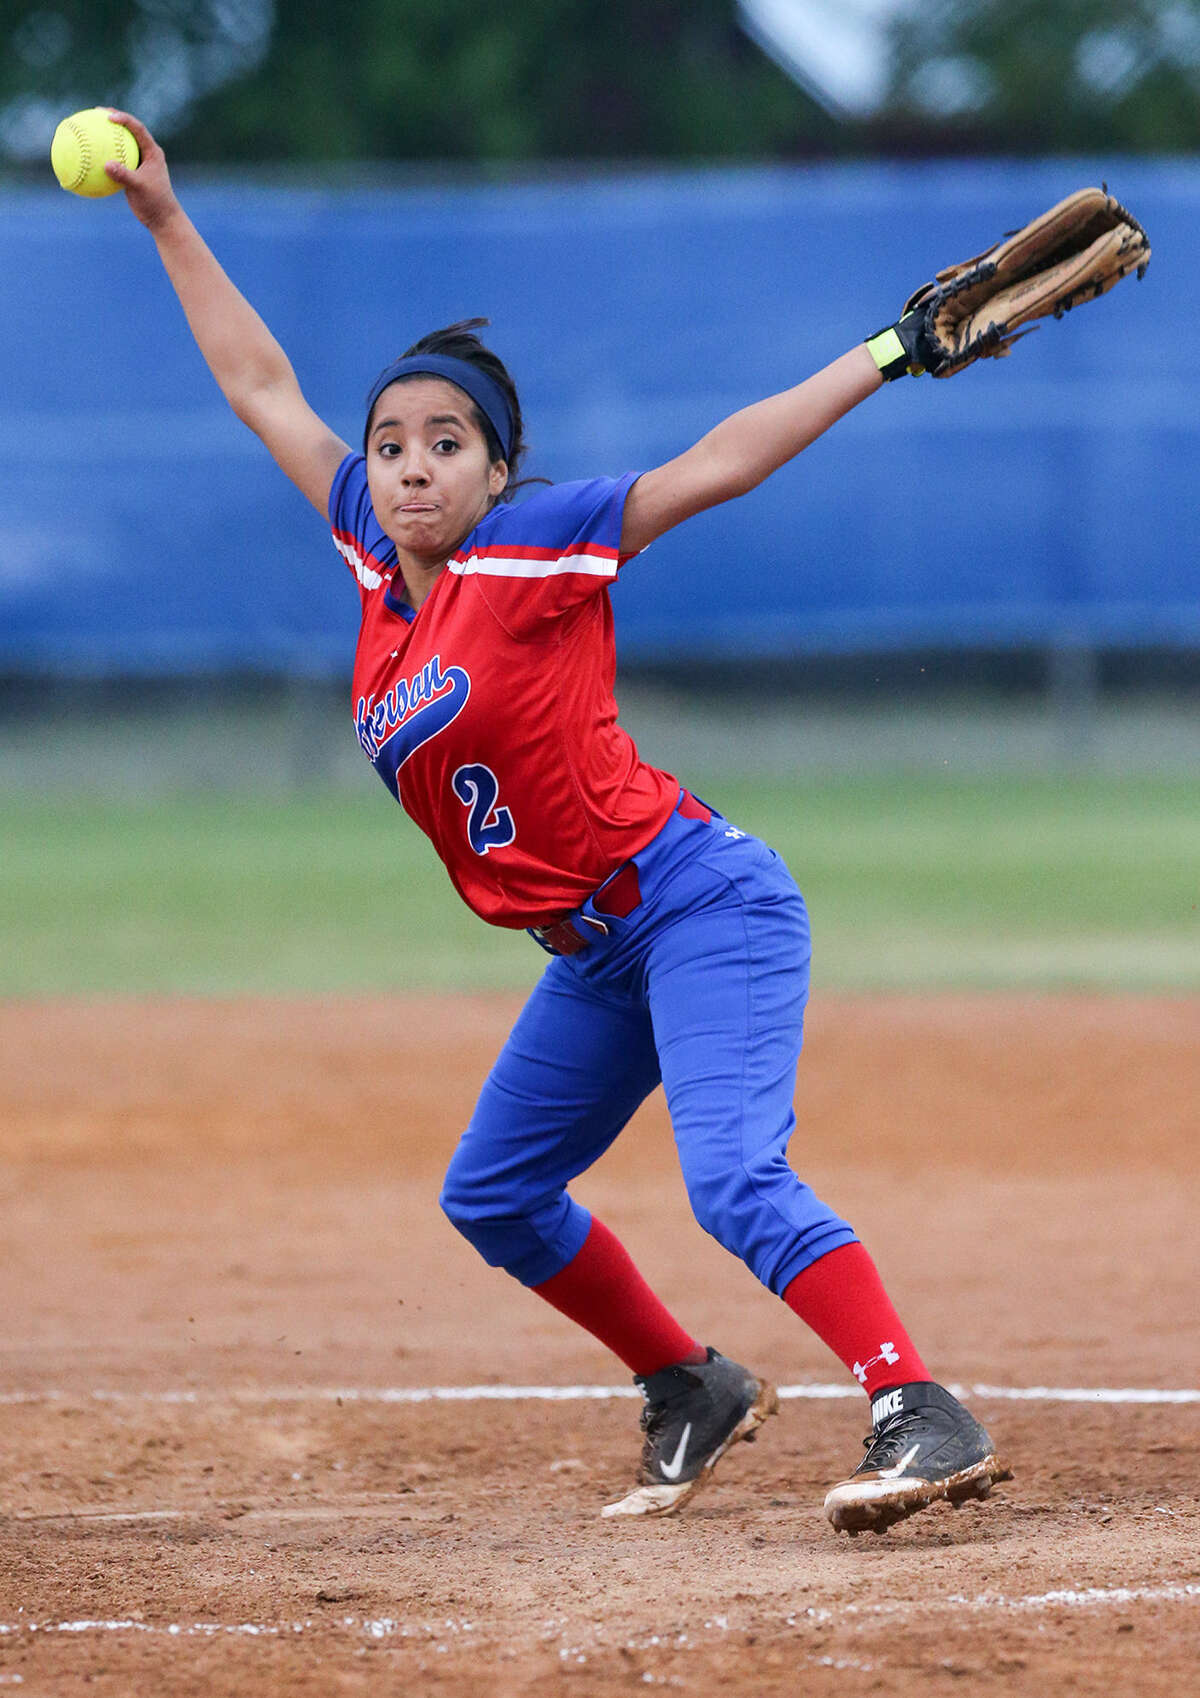 Jefferson's Mary Loera winds up for a throw to the plate in a game Thursday with Edison. Jefferson scored 12 runs in the seventh inning to beat the Lady Bears, 14-3.